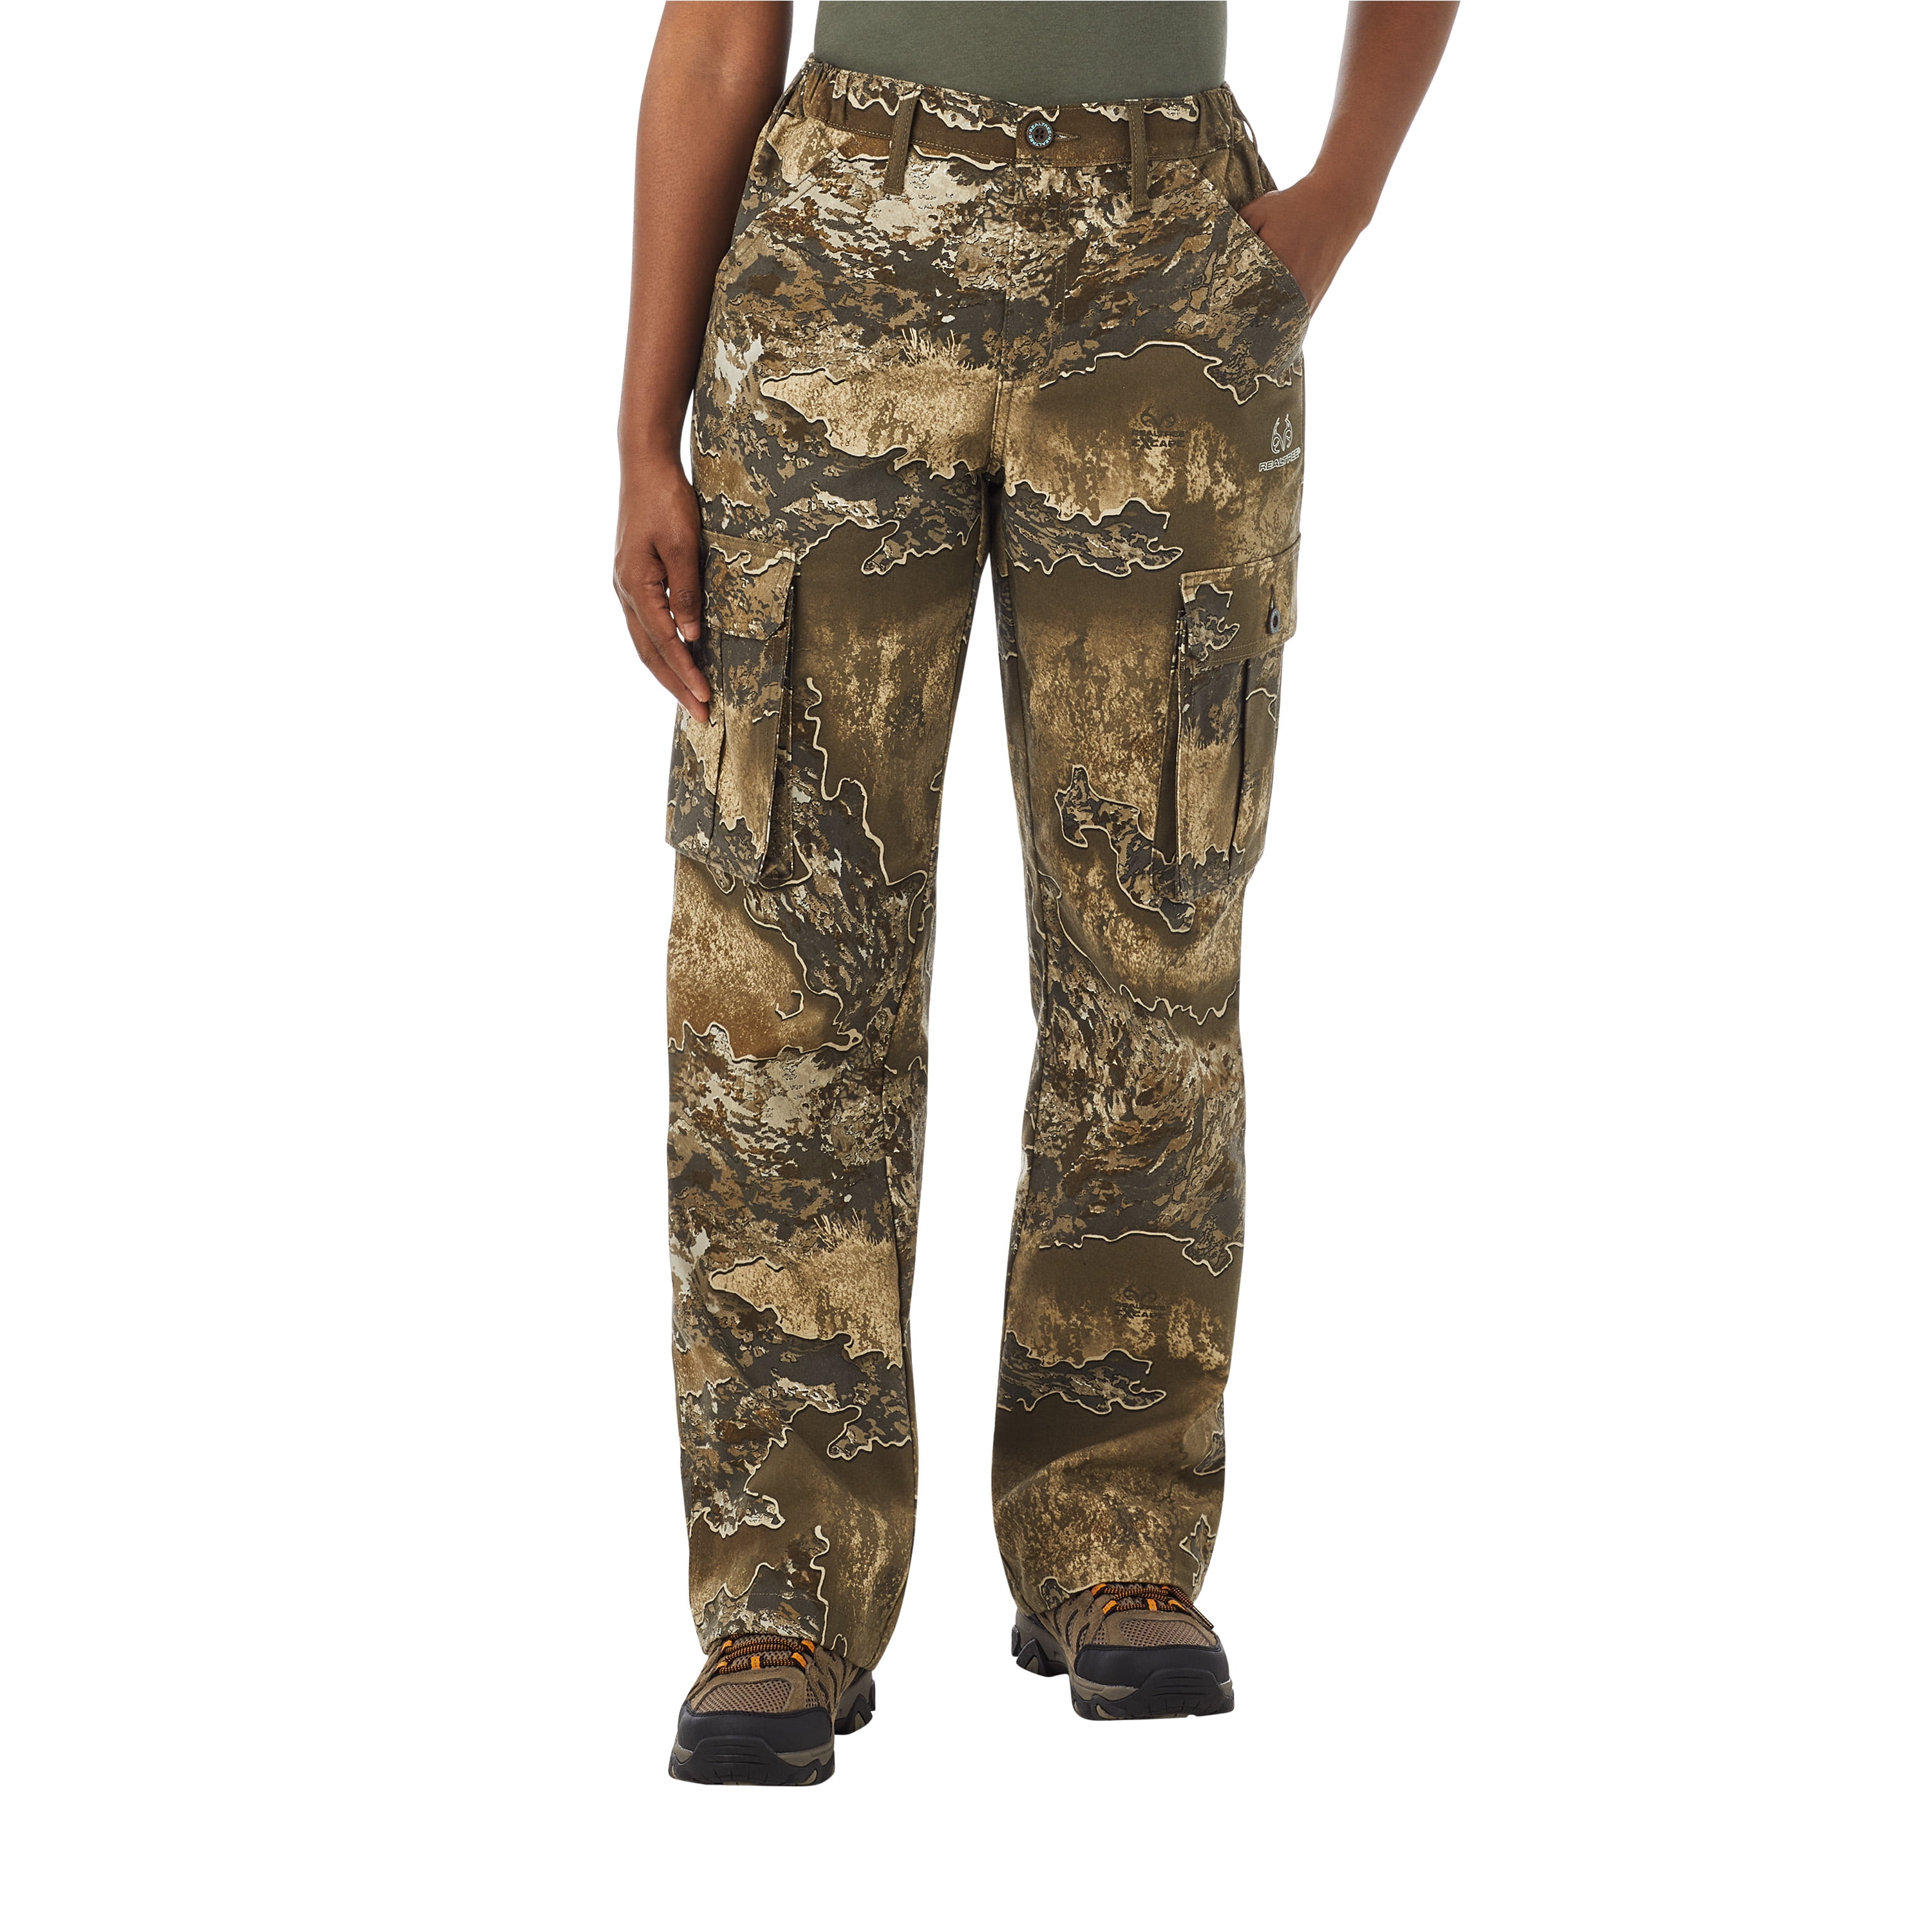 Realtree EXCAPE Ladies 6-Pocket Cargo Hunting Pant, S-2XL 